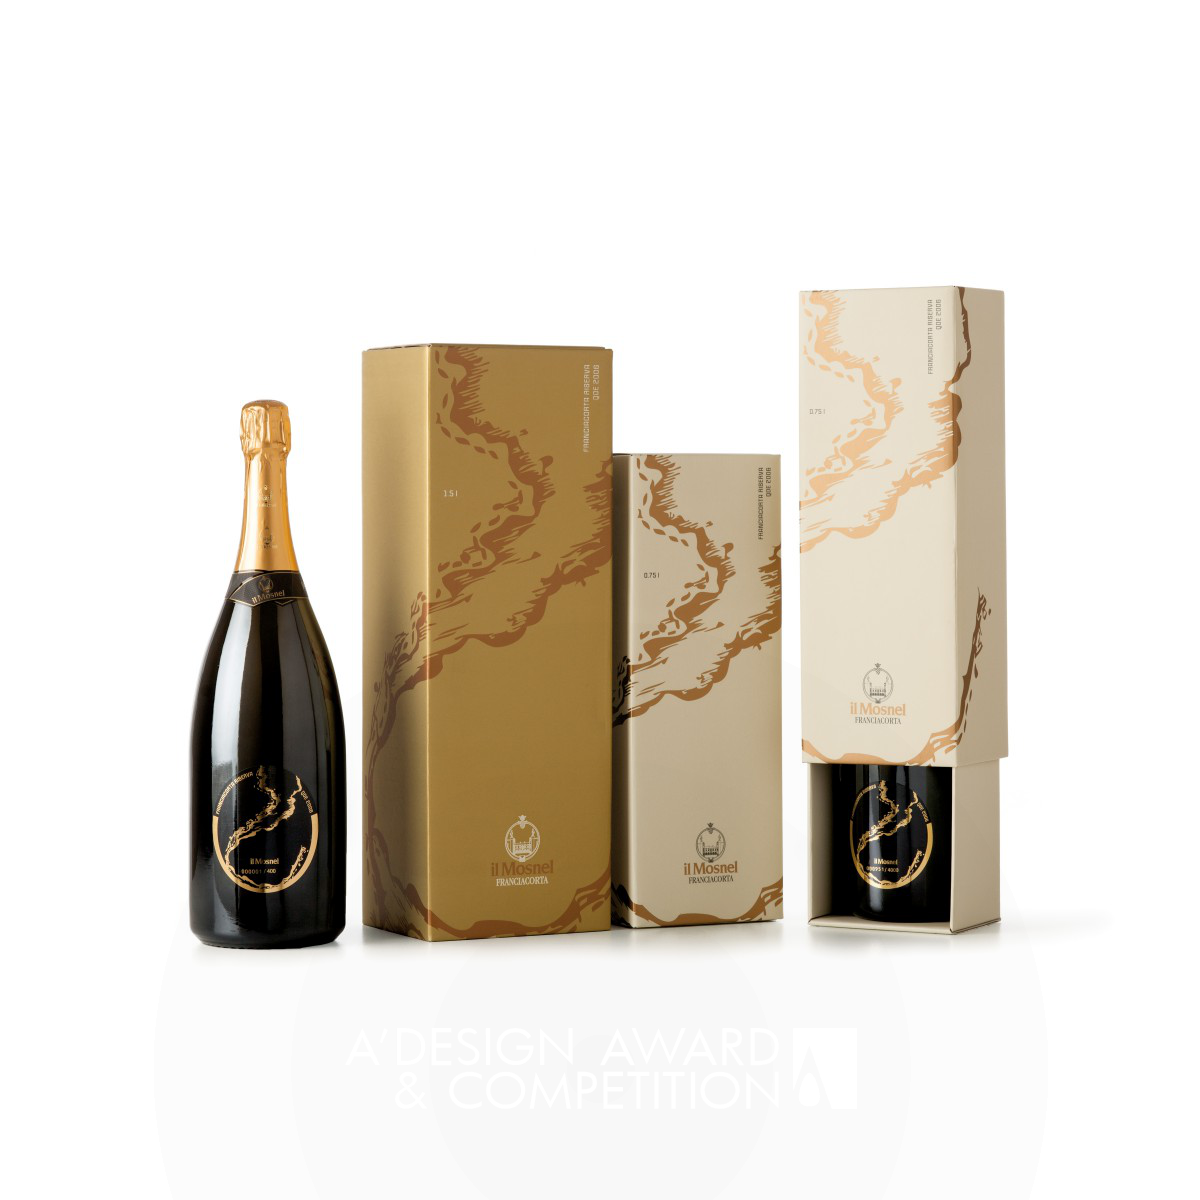 Il Mosnel QdE 2012 Sparkling Wine Label and Pack